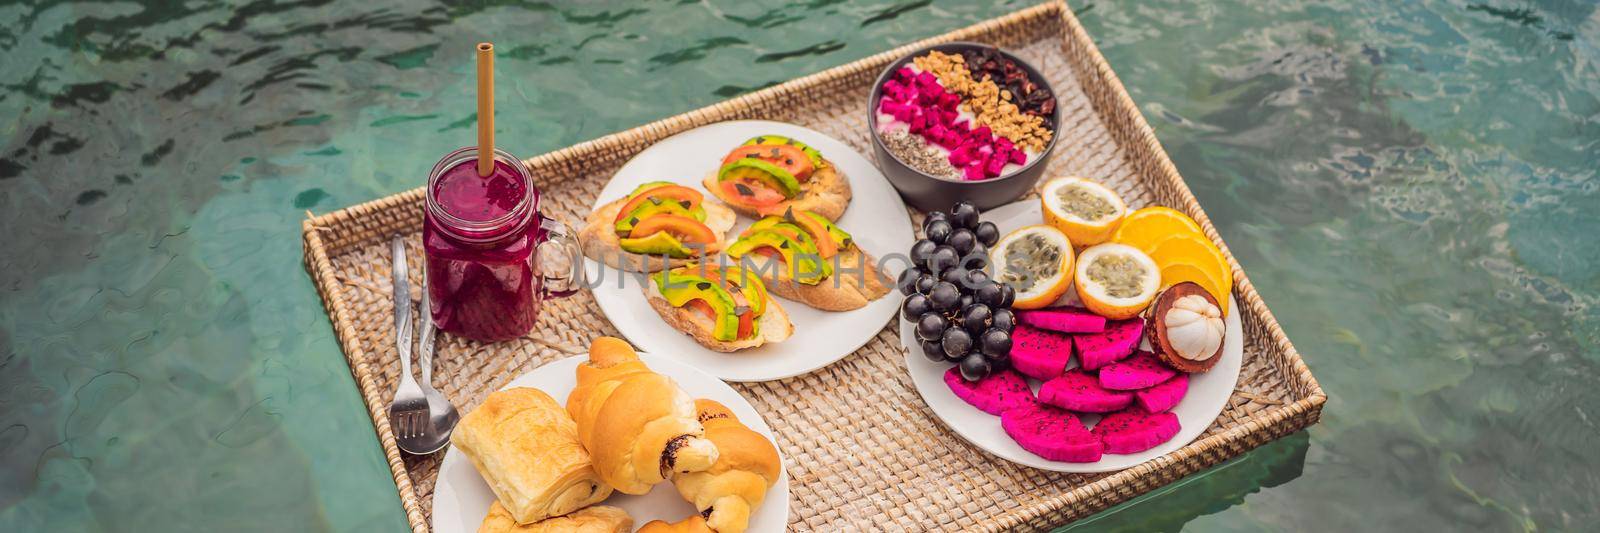 BANNER, LONG FORMAT Breakfast tray in swimming pool, floating breakfast in luxury hotel smoothies and fruit plate, smoothie bowl by the hotel pool. Exotic summer diet. Tropical beach lifestyle. Bali Trend.